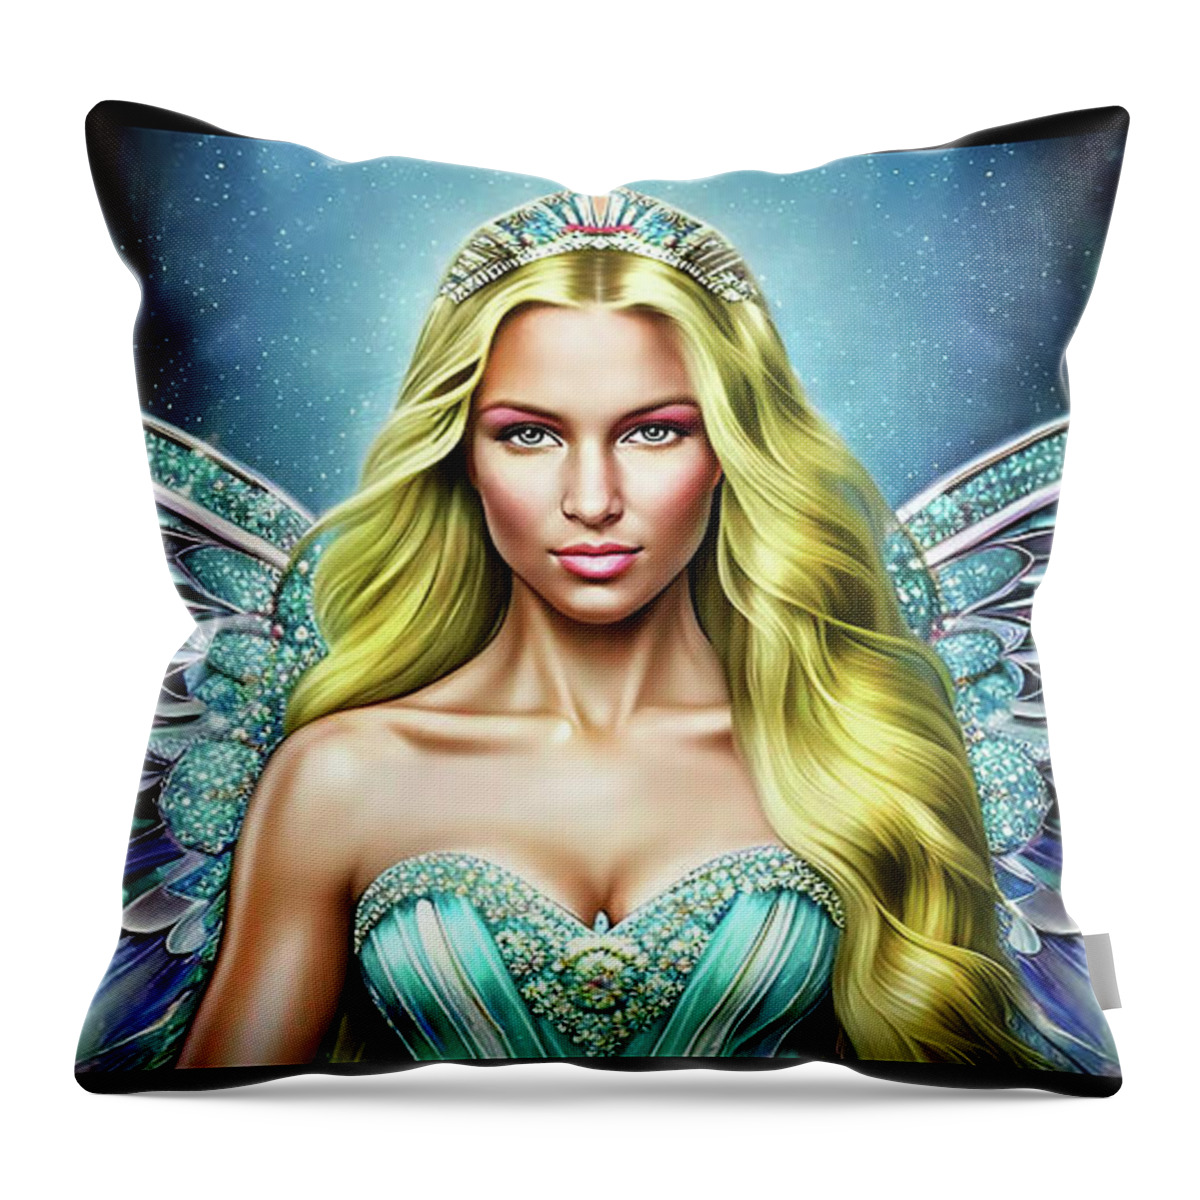 Healer Throw Pillow featuring the digital art The Prom Queen by Shawn Dall